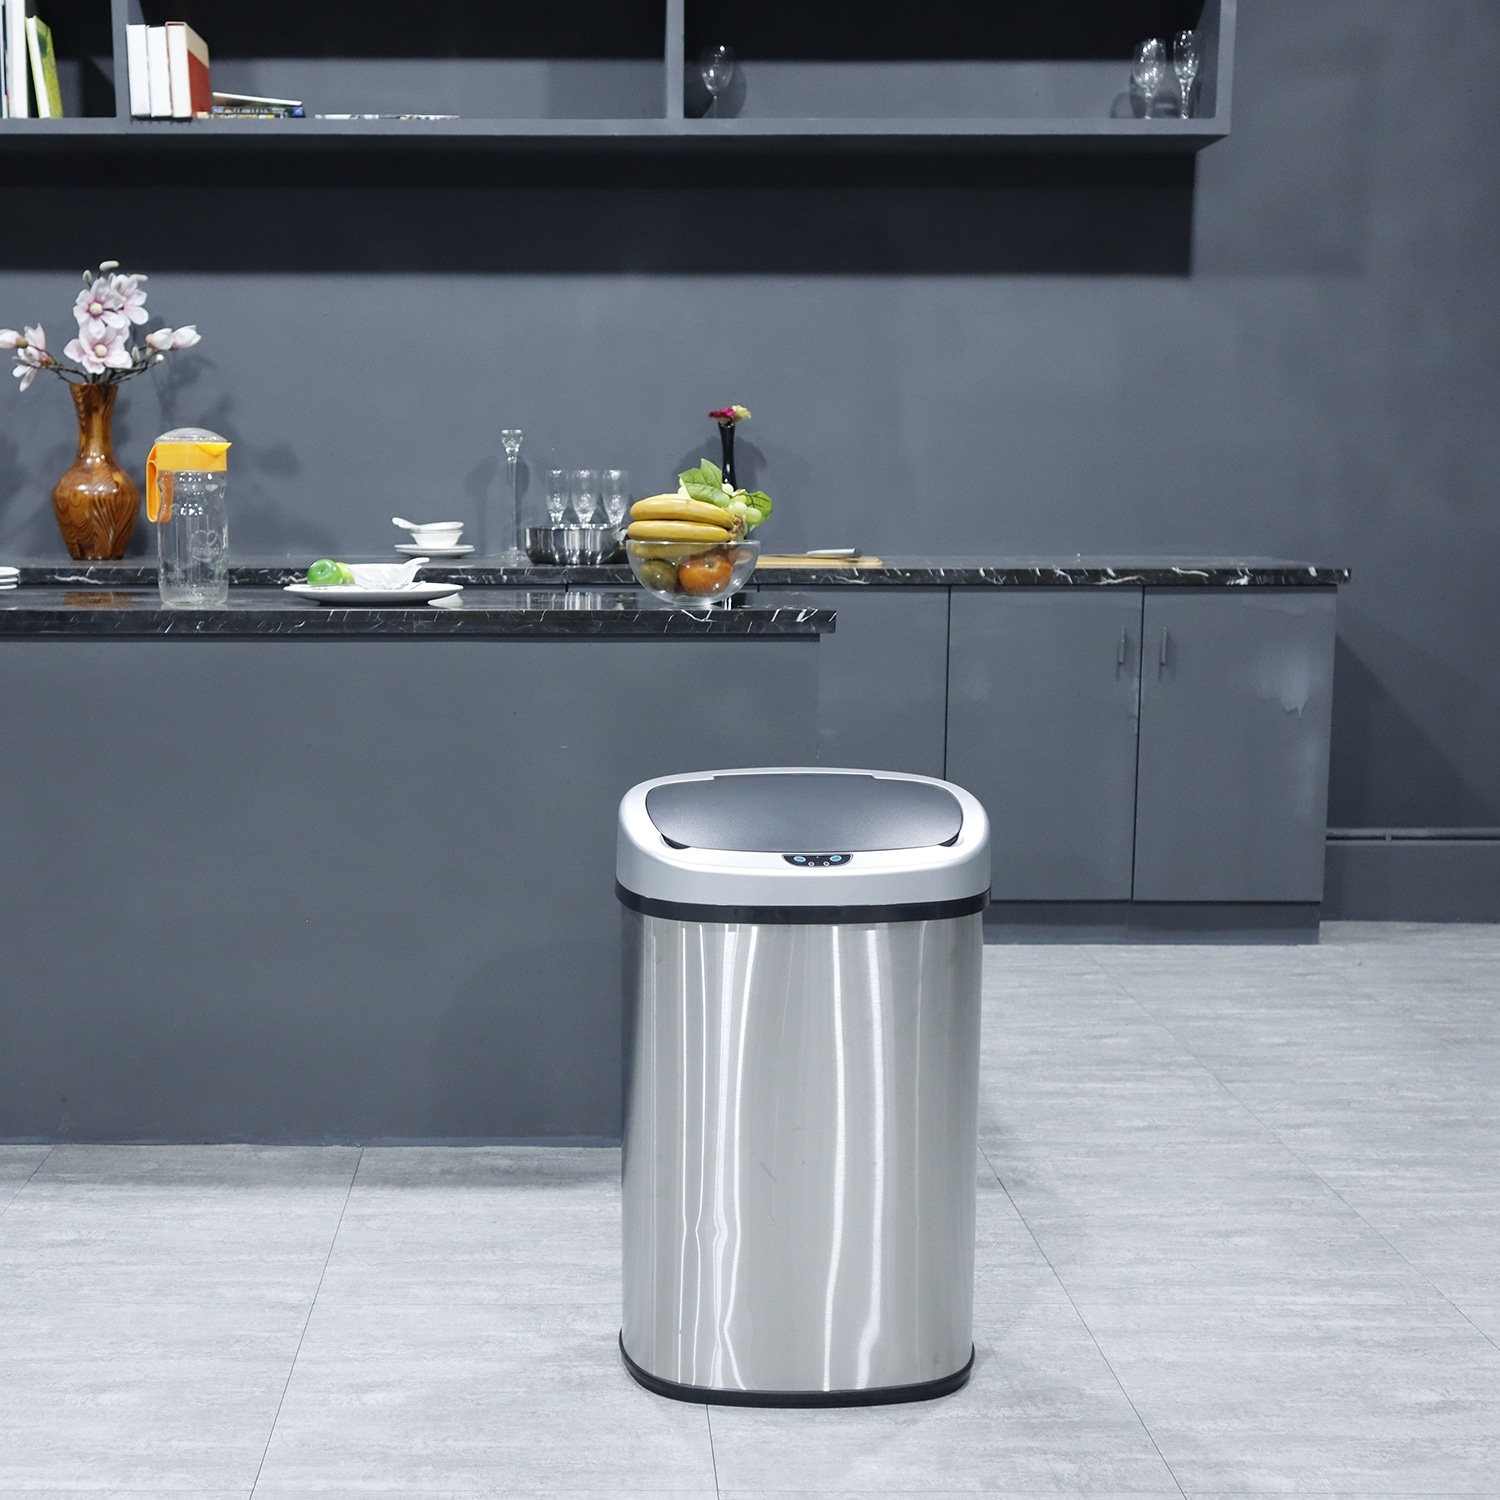 https://ak1.ostkcdn.com/images/products/is/images/direct/f7742897124e9fa6c118b6c8007a938850c14e15/Totti-13-Gallon-Stainless-Steel-Matte-Finish-Motion-Sensor-Trash-Can-w--Black-Soft-Closing-Lid-%26-Active-Odor-Filter.jpg